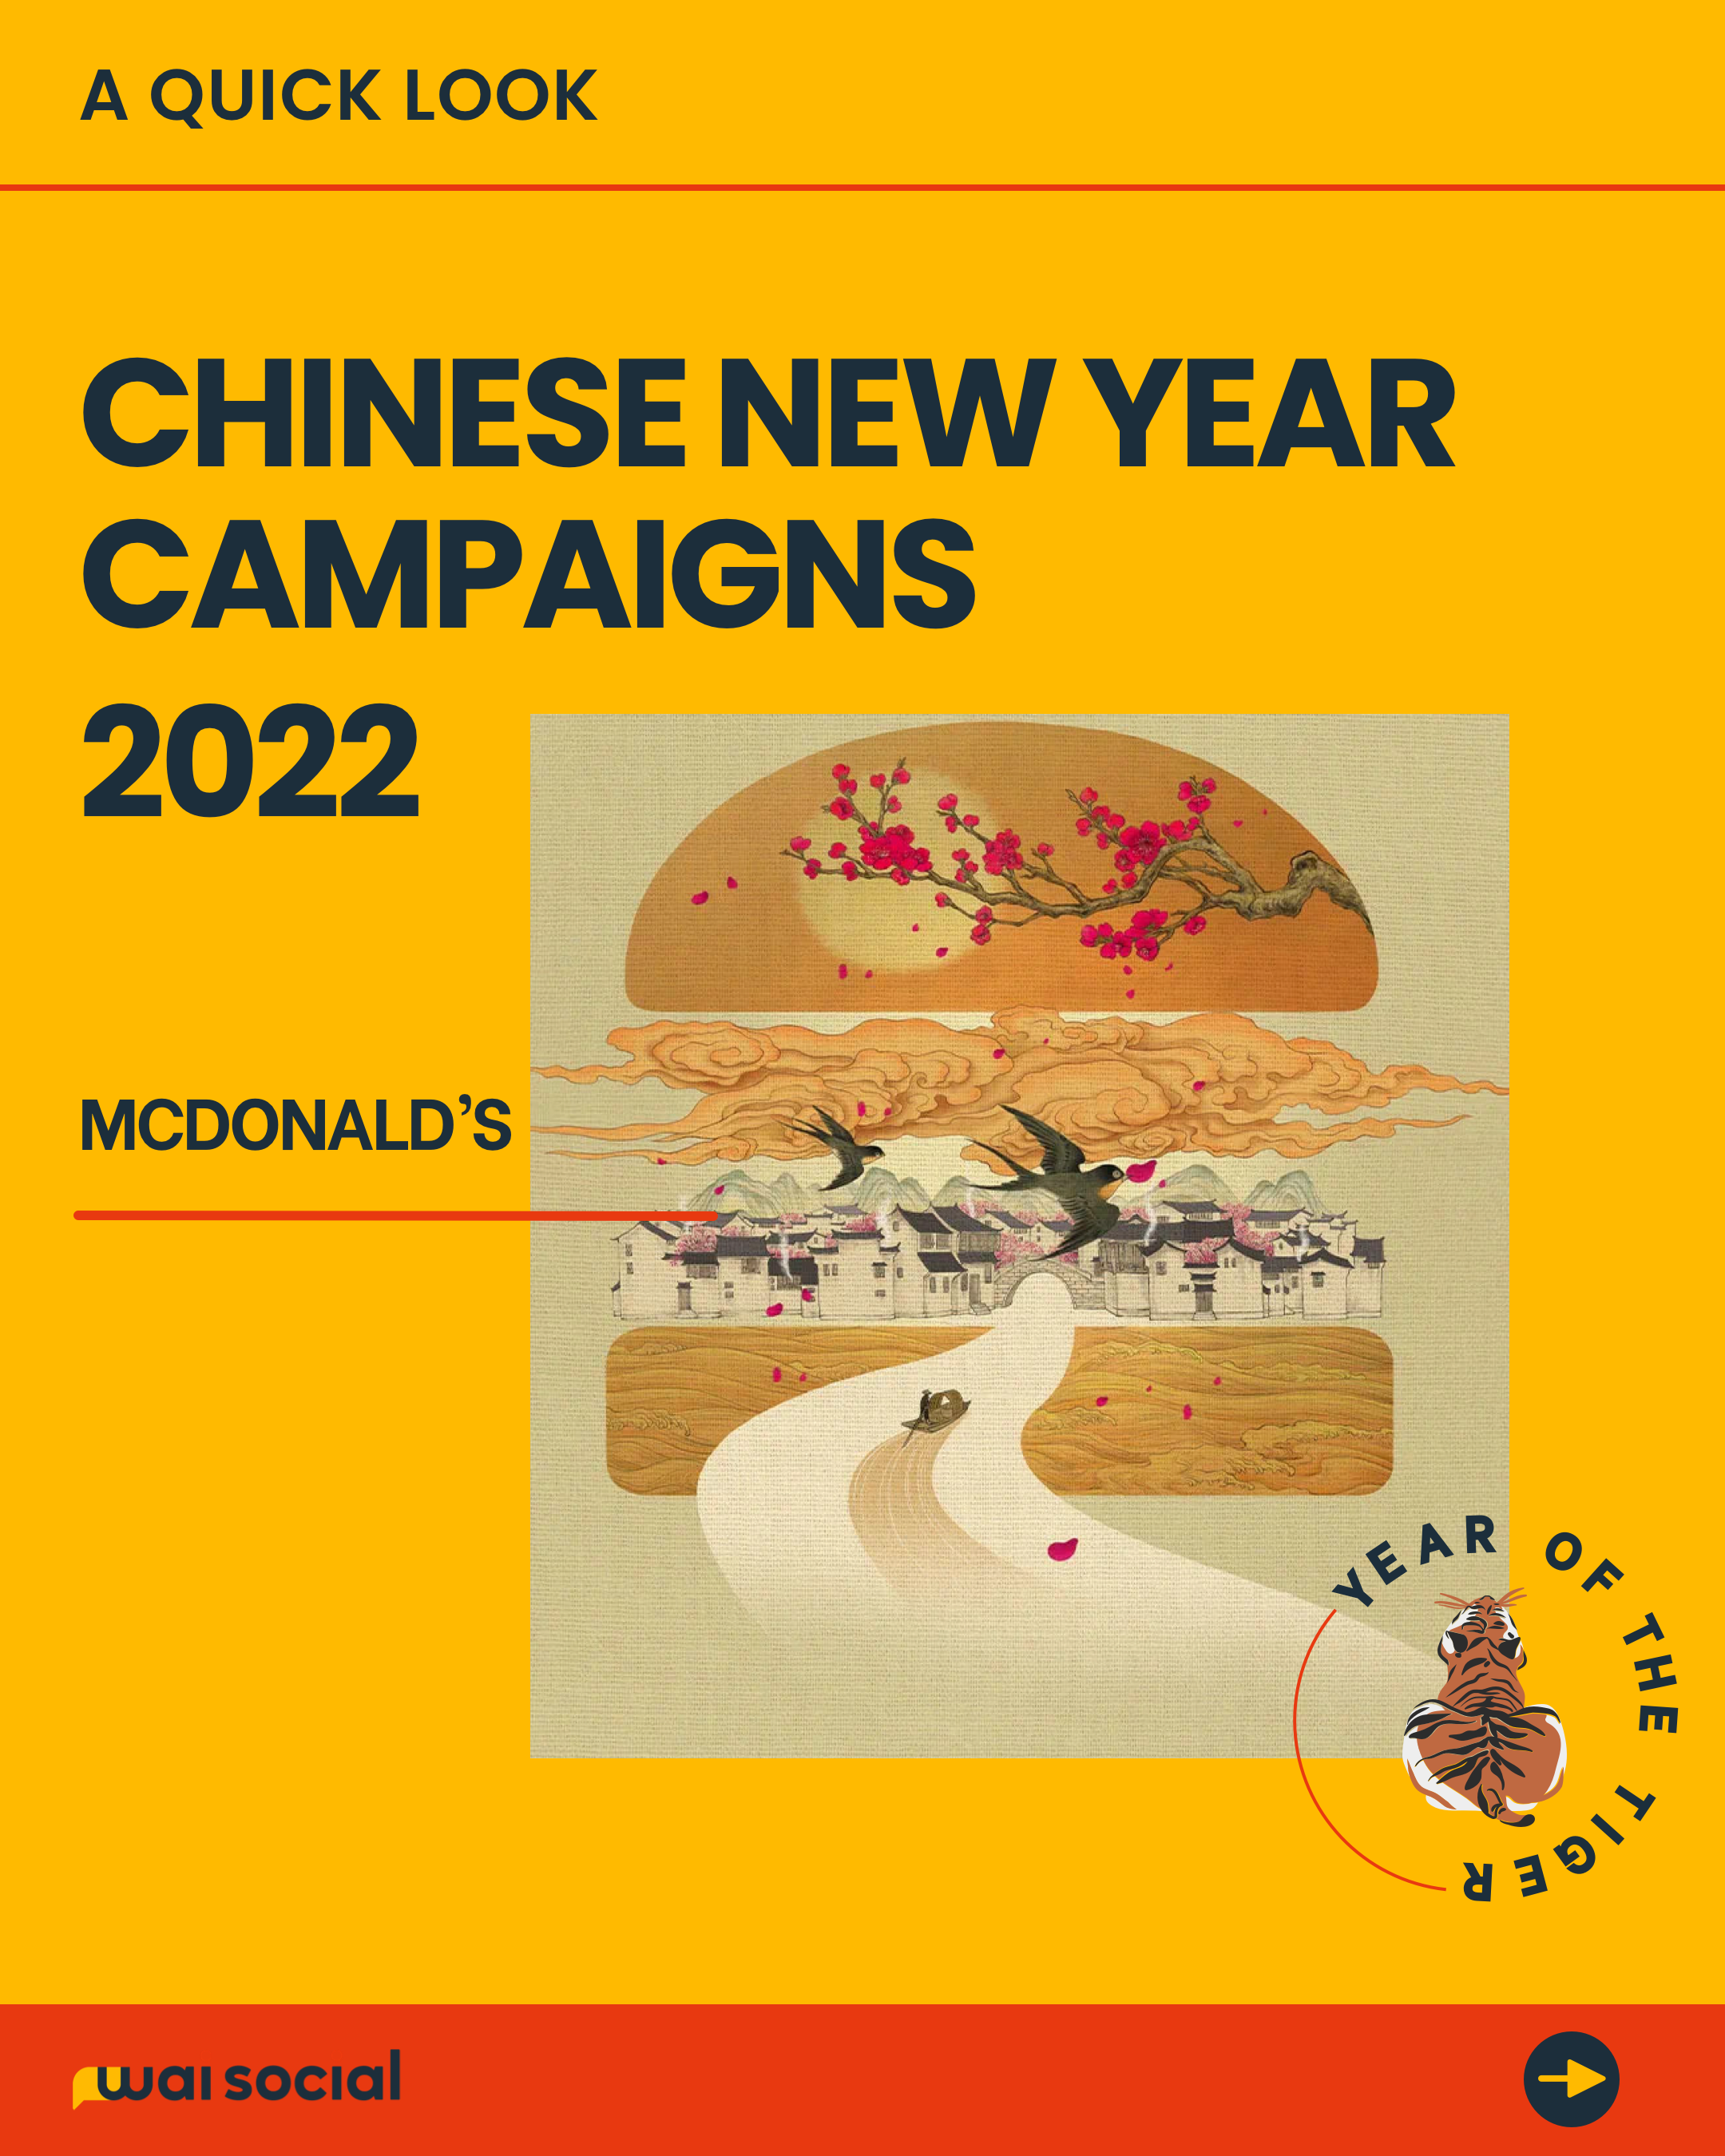 Creating standout campaigns for Chinese New Year 2023 - Croud